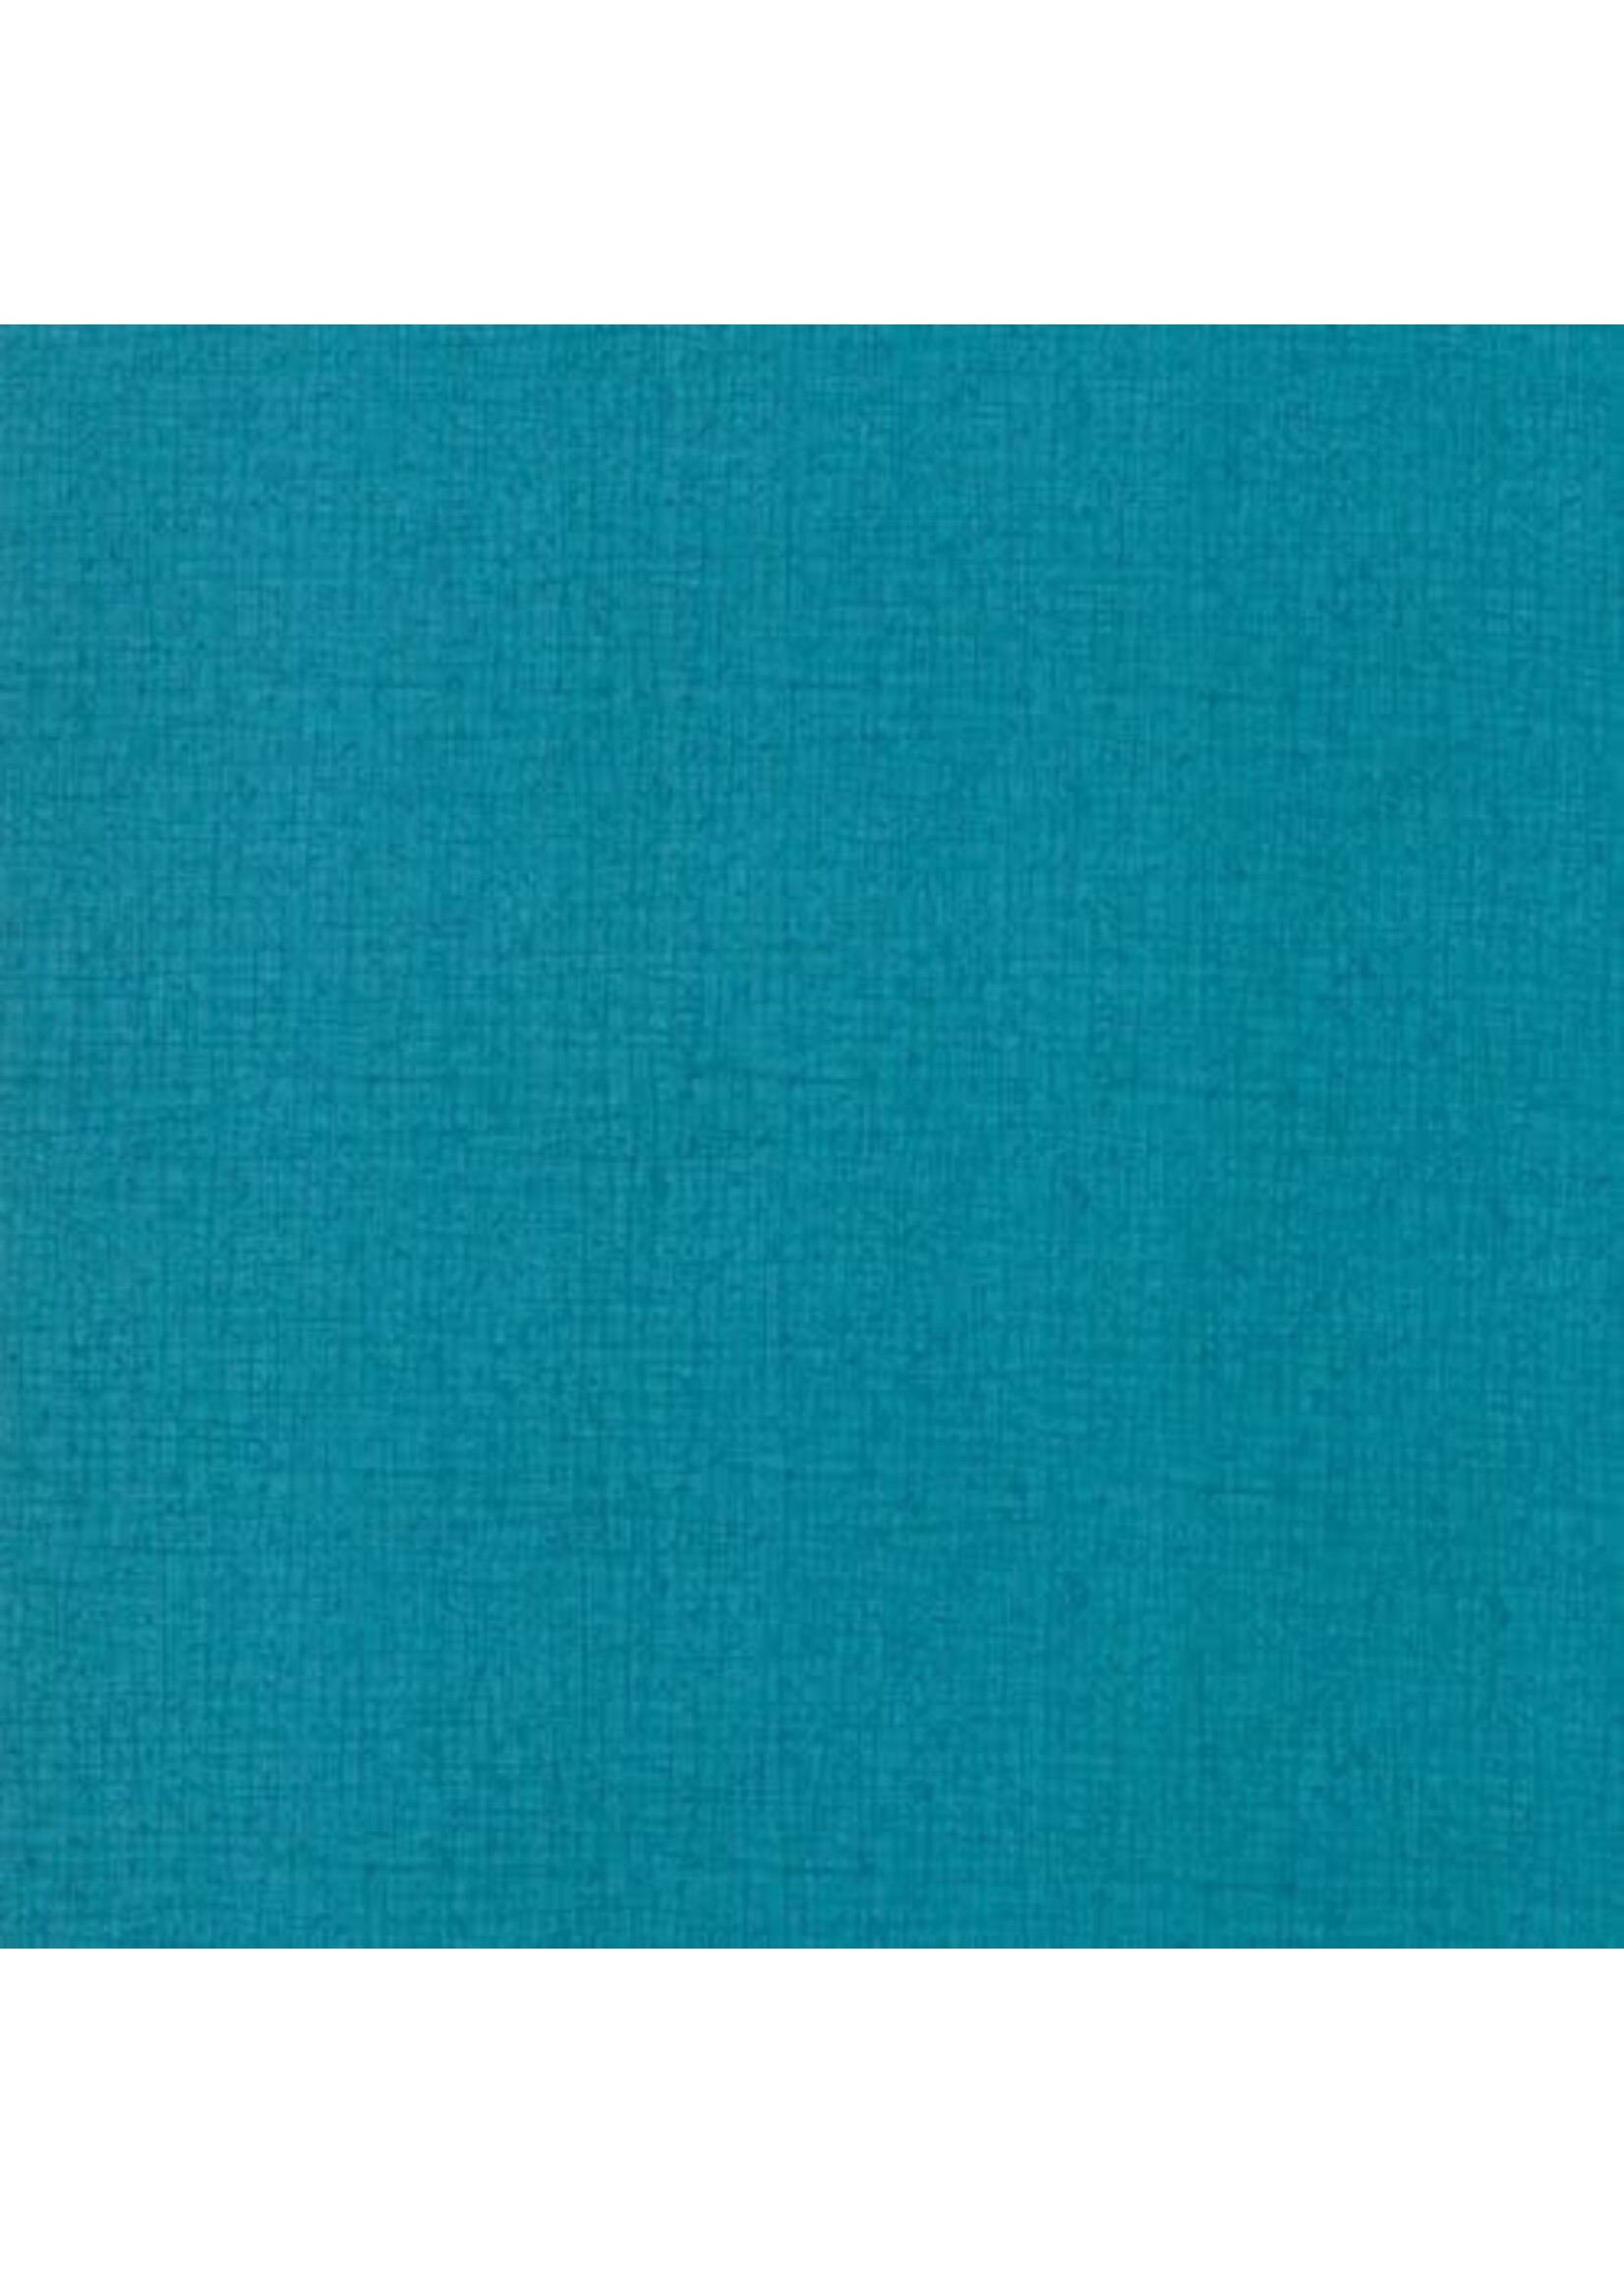 Moda Fabrics Thatched - Robin Pickens - Turquoise - 74101